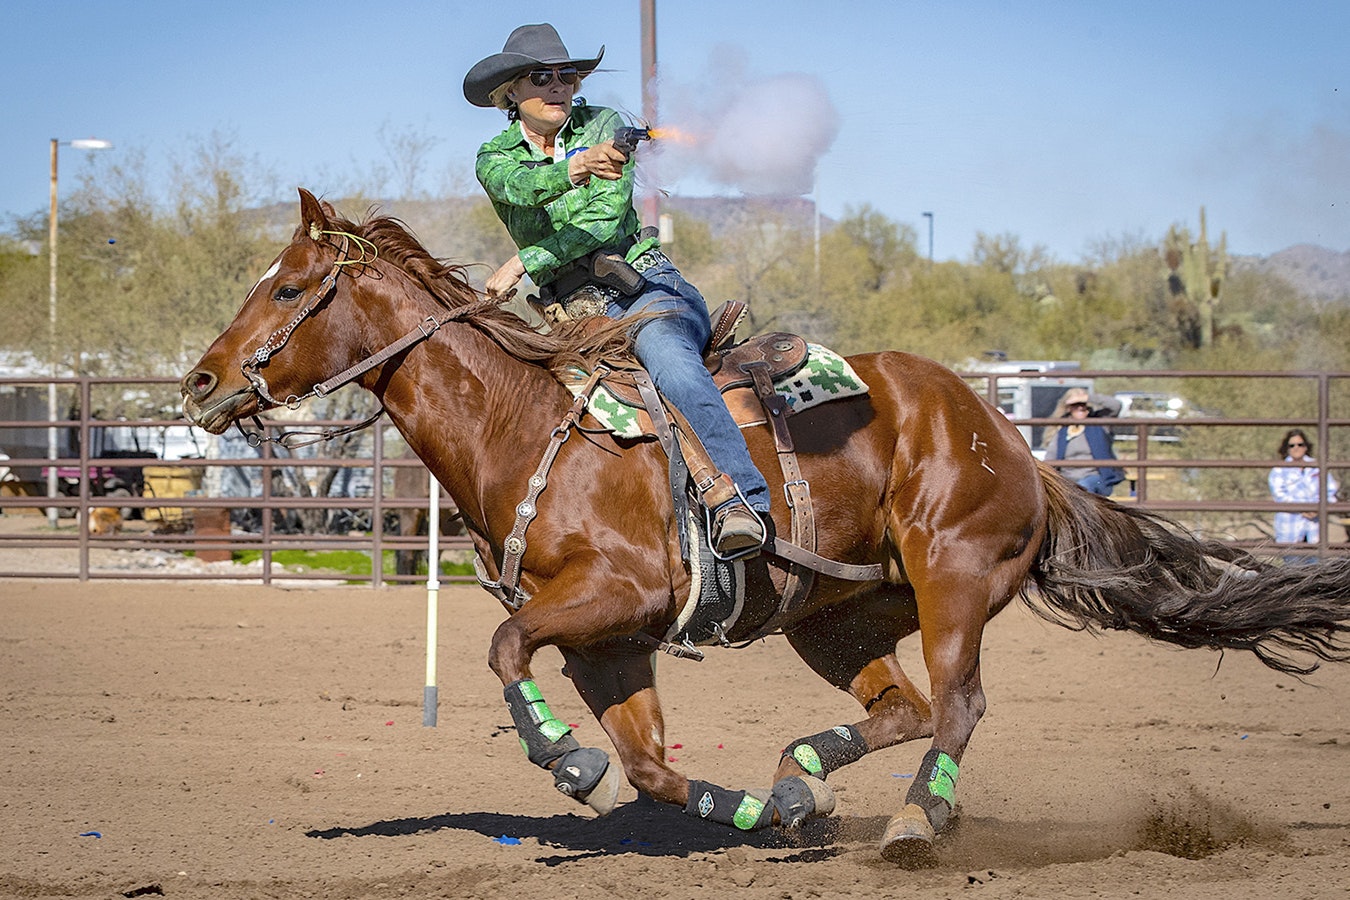 Most horses, as well as competitors, use ear plugs in the sport of cowboy mounted shooting. Notice them here on Kenda Lenseigne's horse.